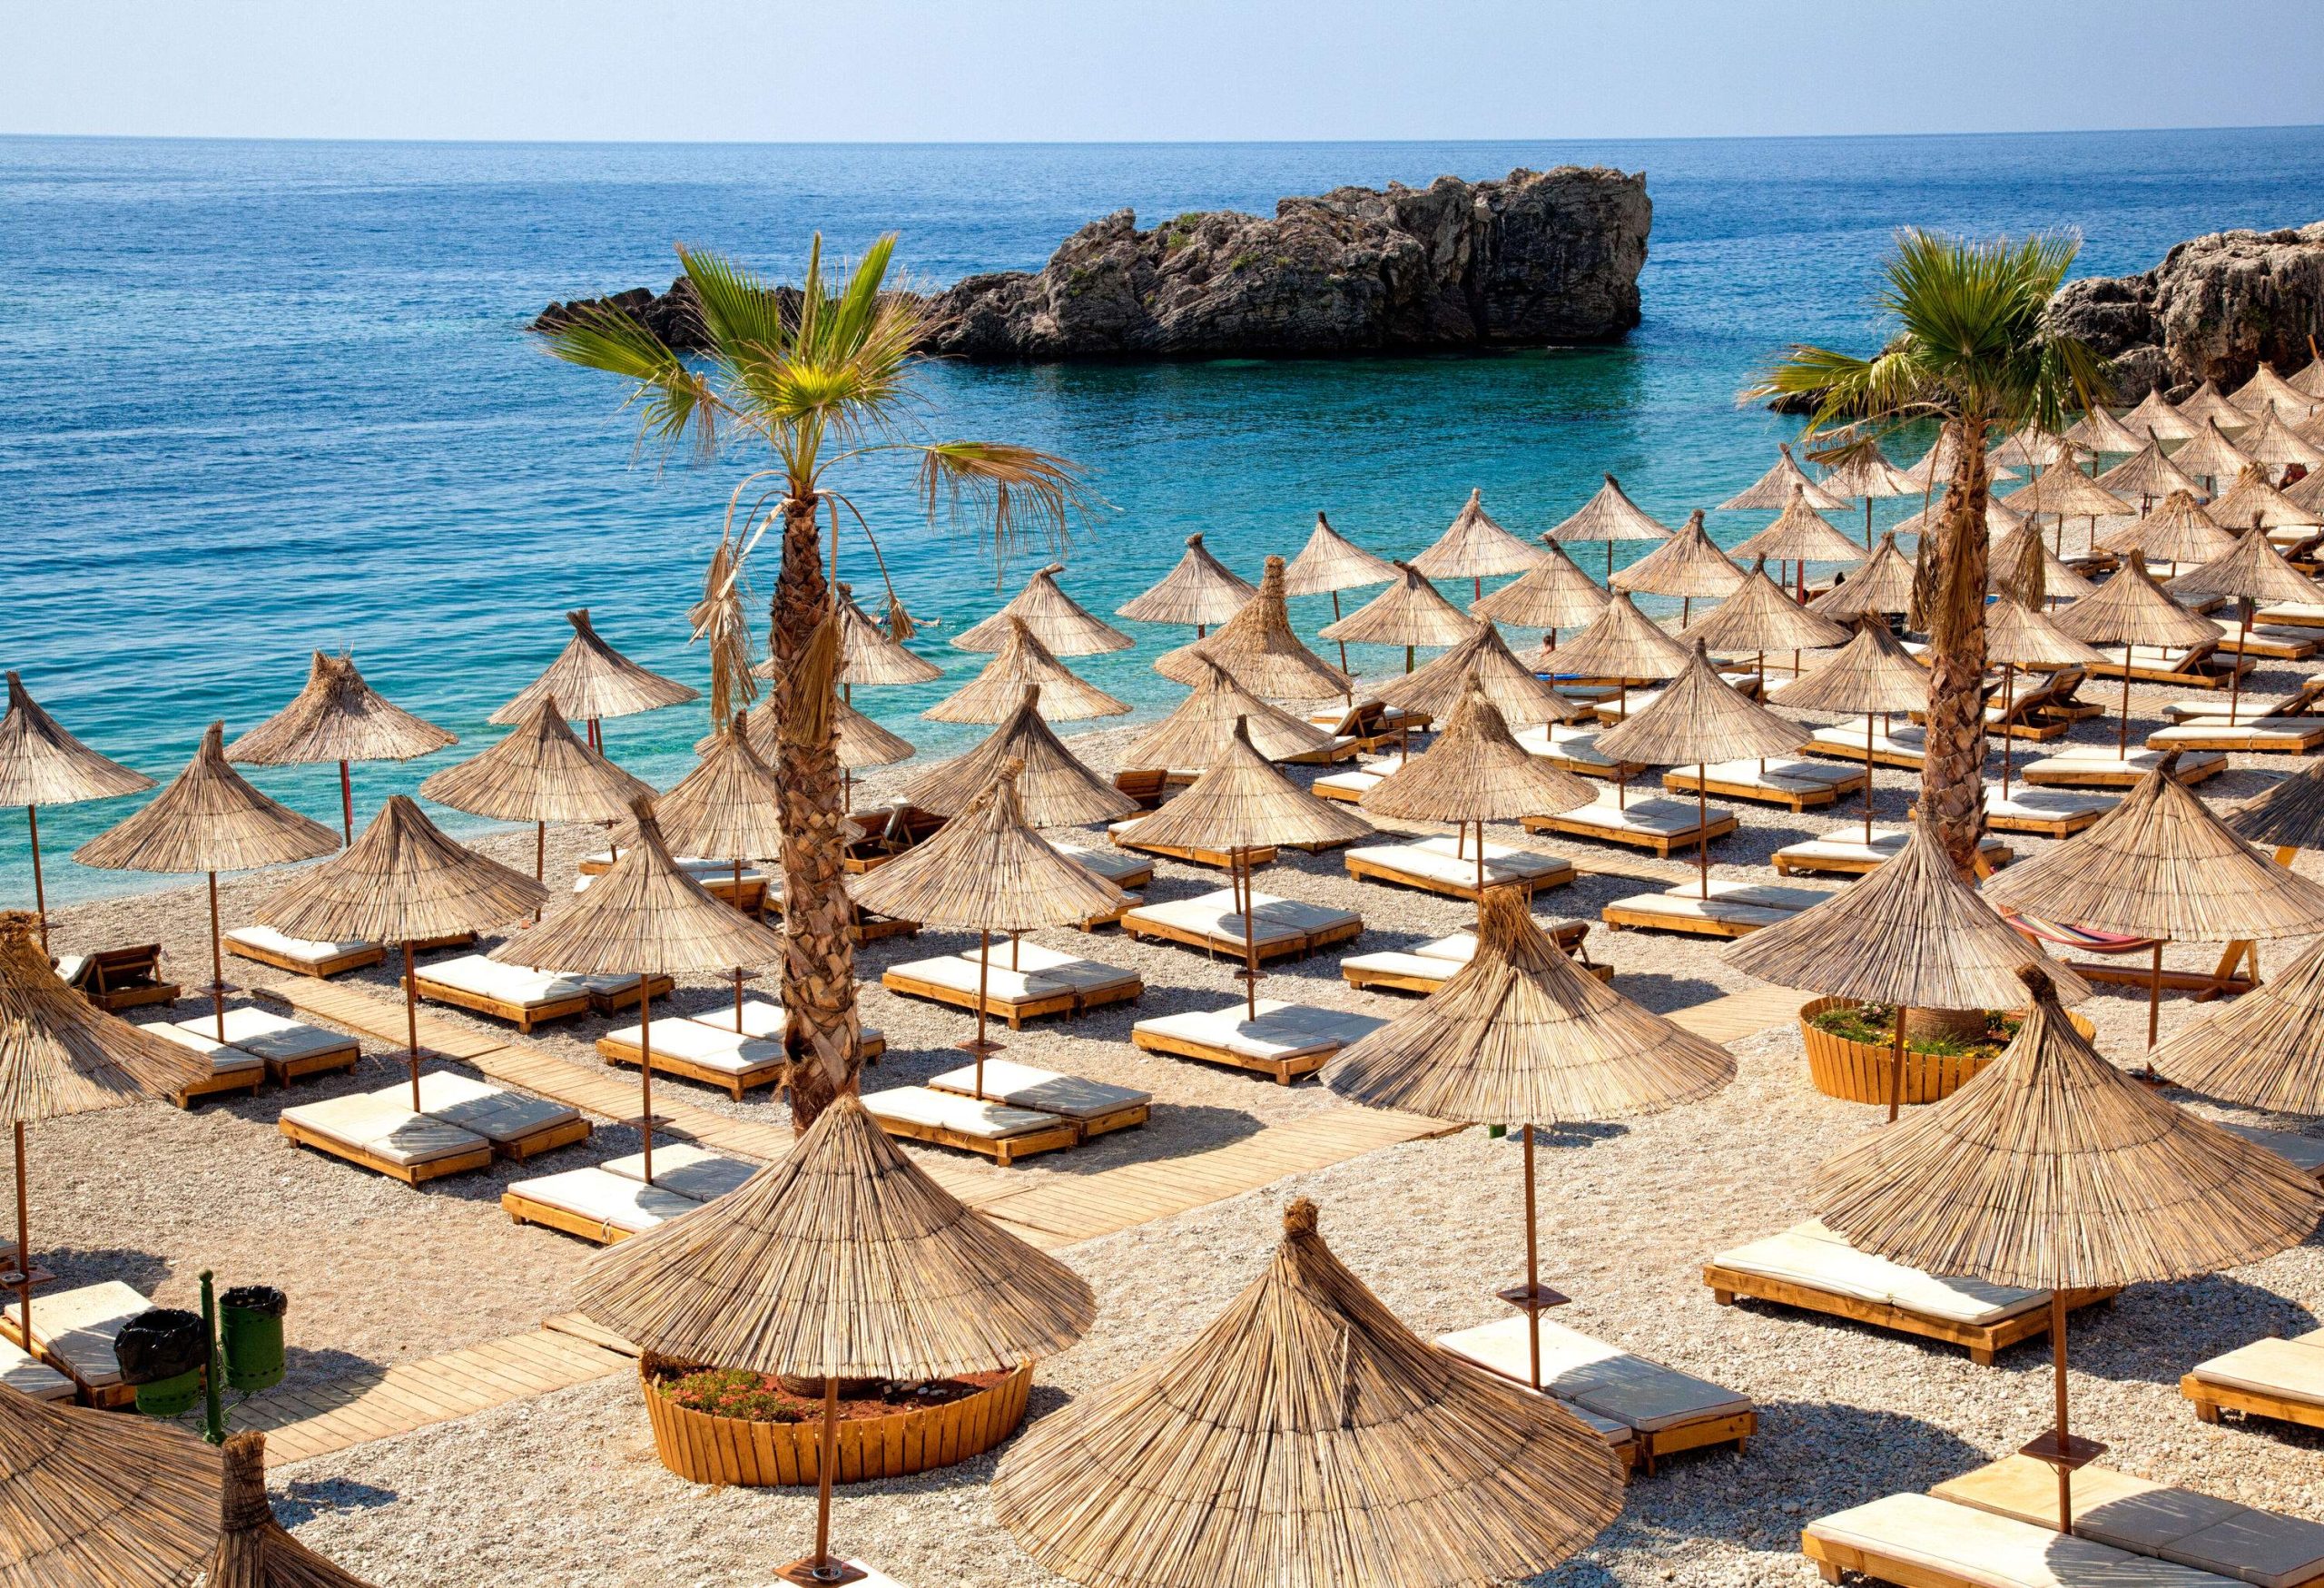 A beach with rows of sunbeds under thatched umbrellas.